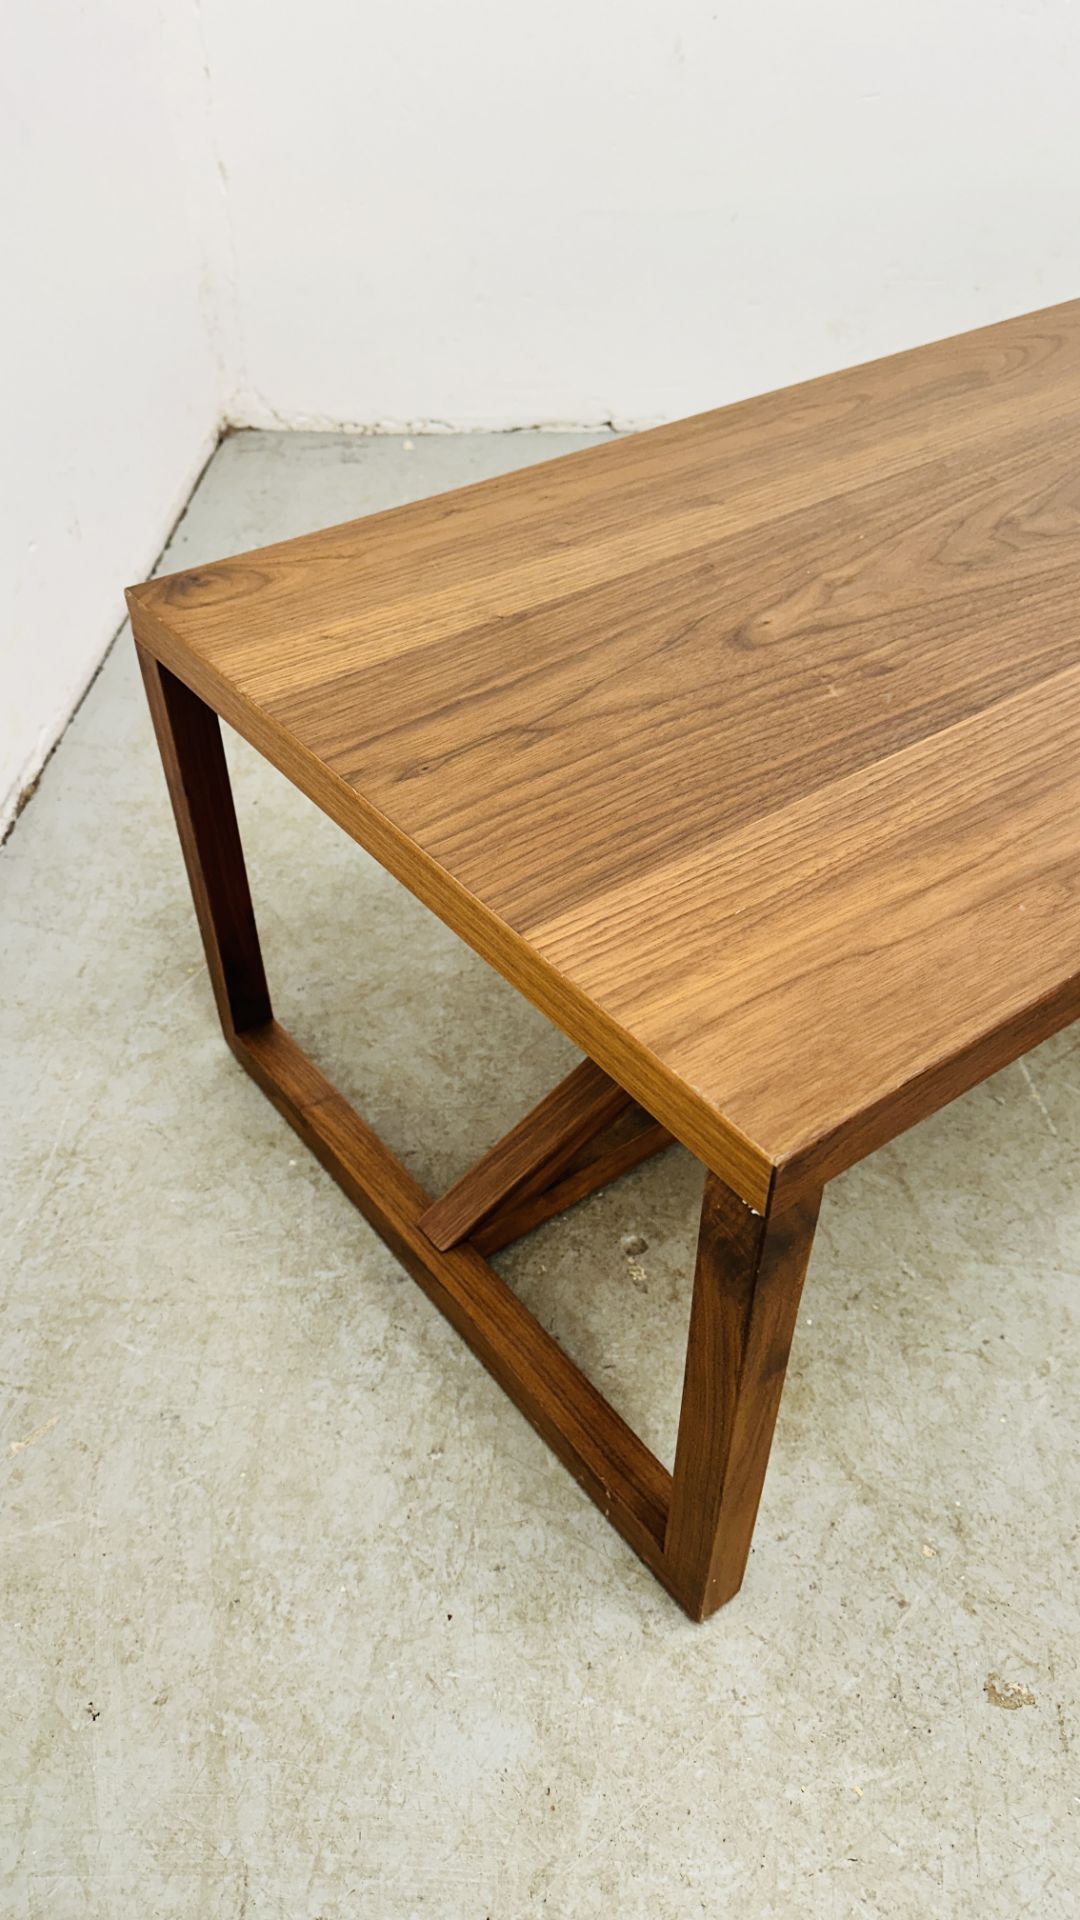 A MODERN STRUT COFFEE TABLE H 35CM X D 51CM X L 137CM. - Image 3 of 7